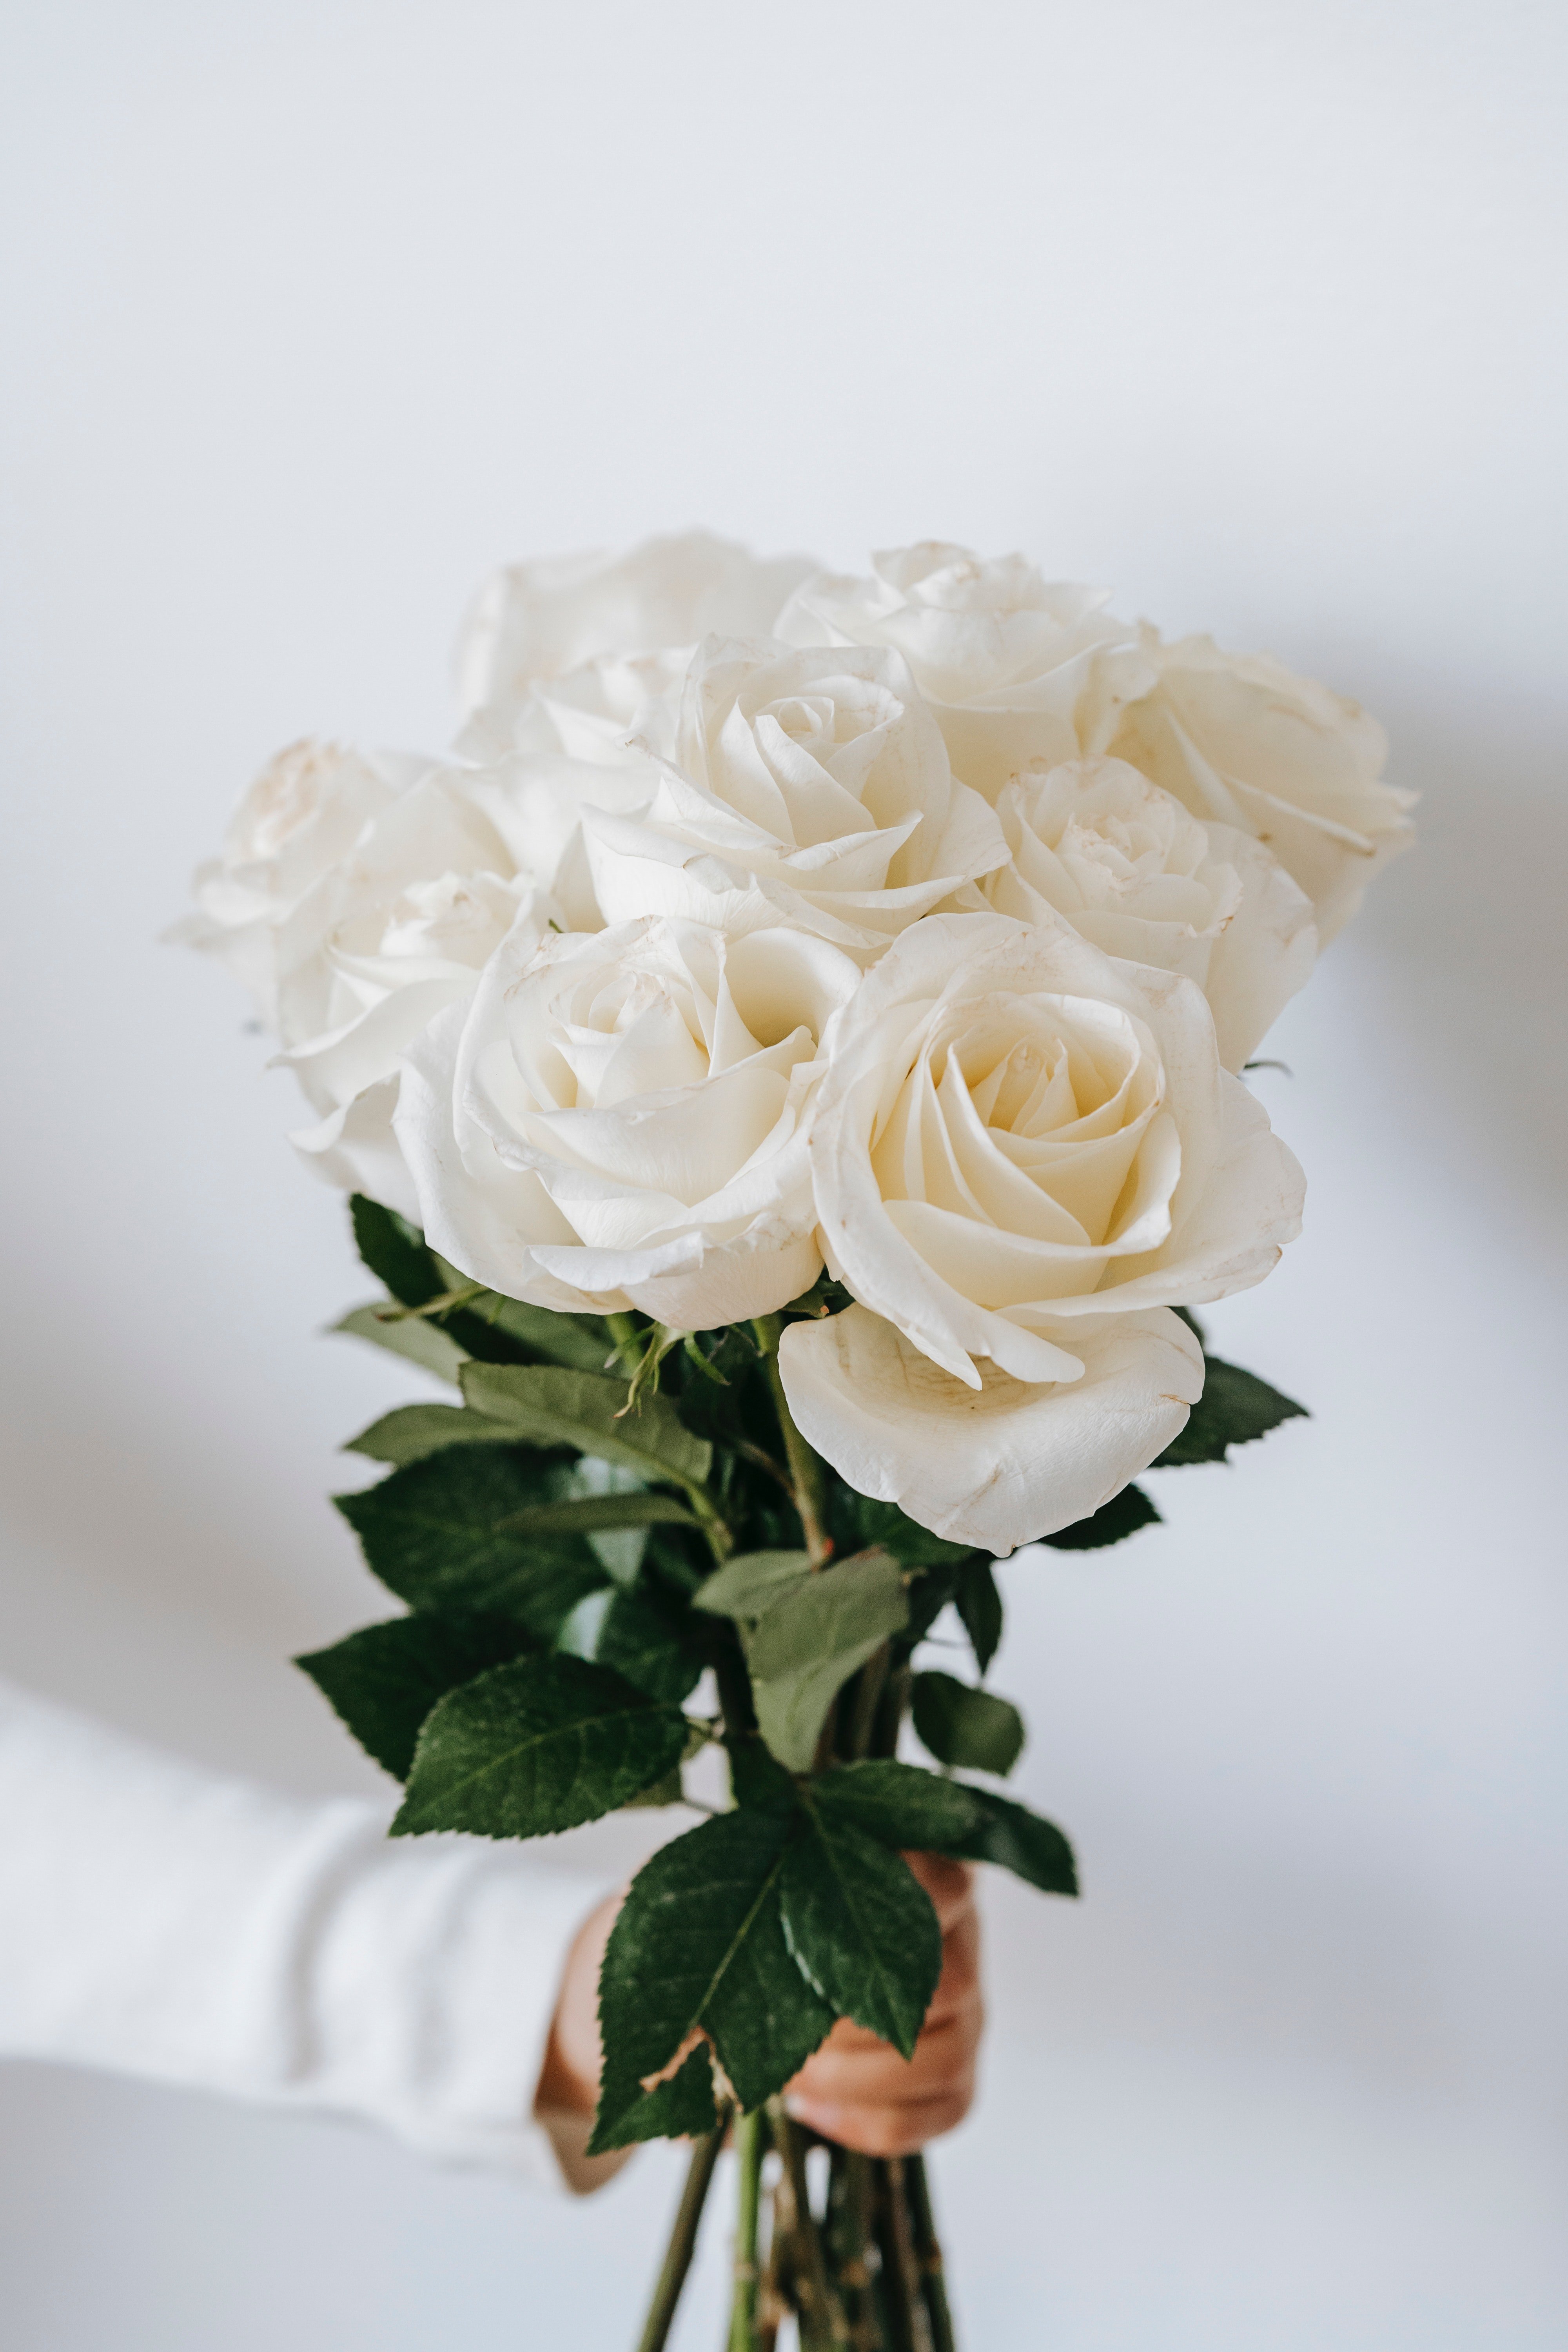 Steve would give Sherry handpicked flowers in exchange for the food she'd give him. | Source: Pexels